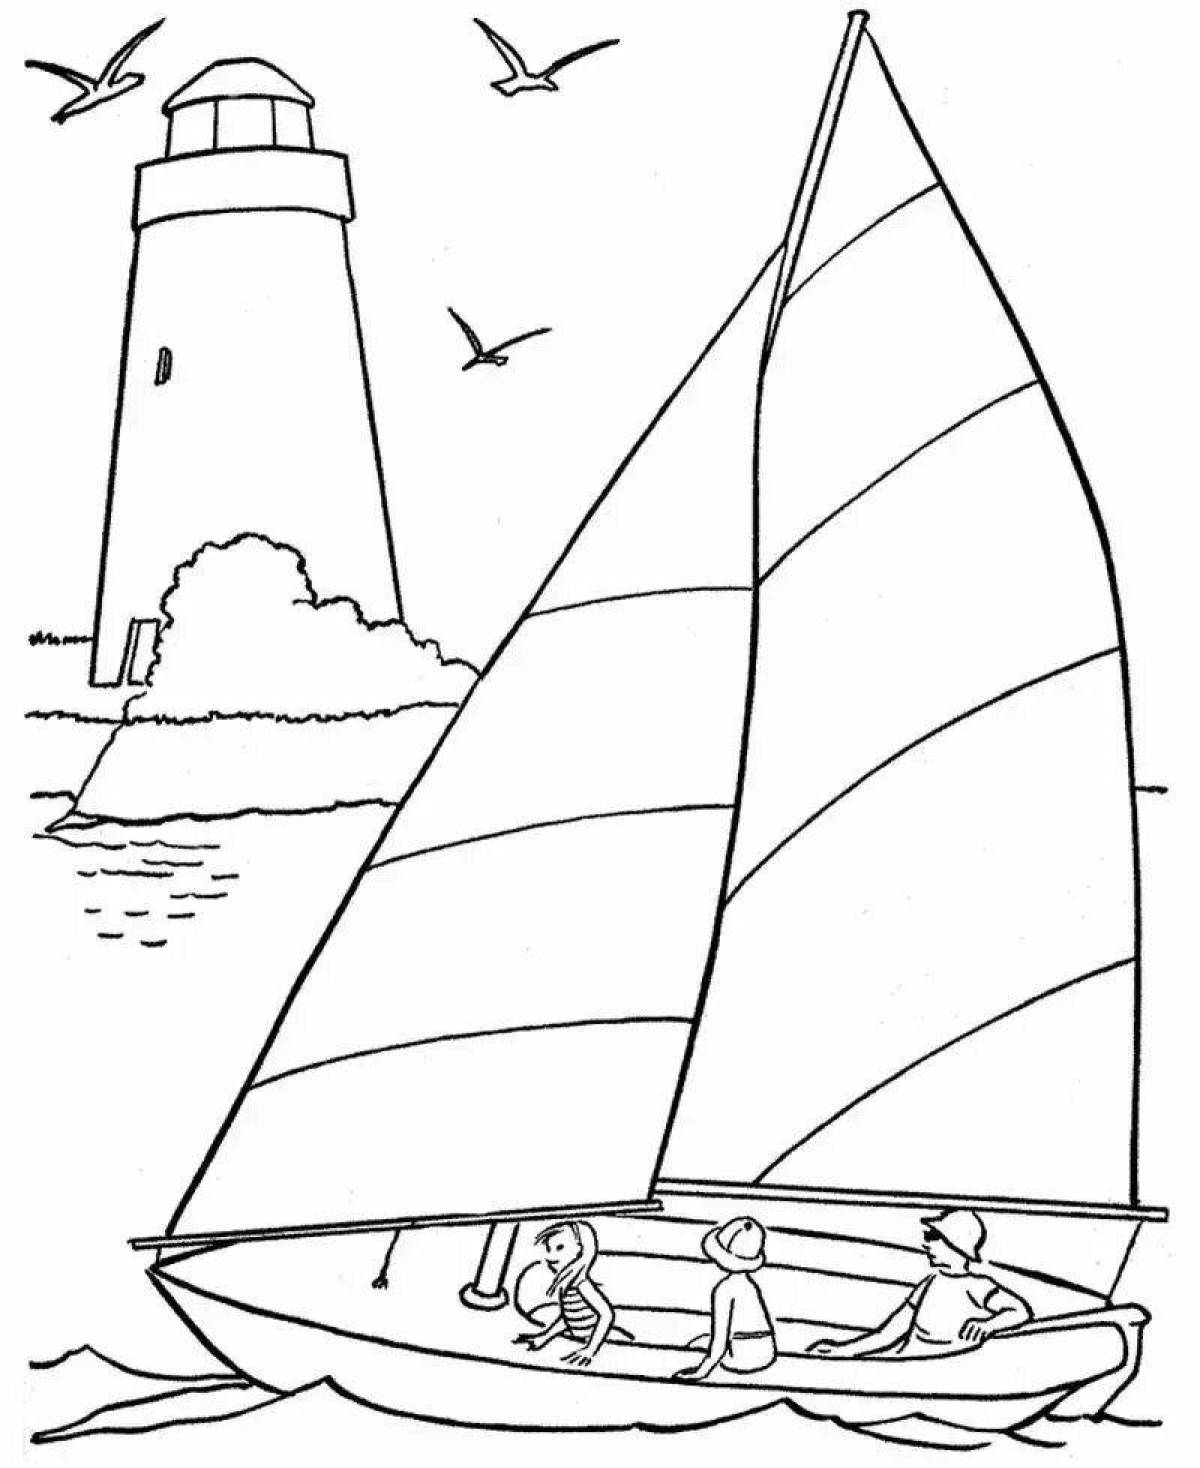 Exciting baby yacht coloring book